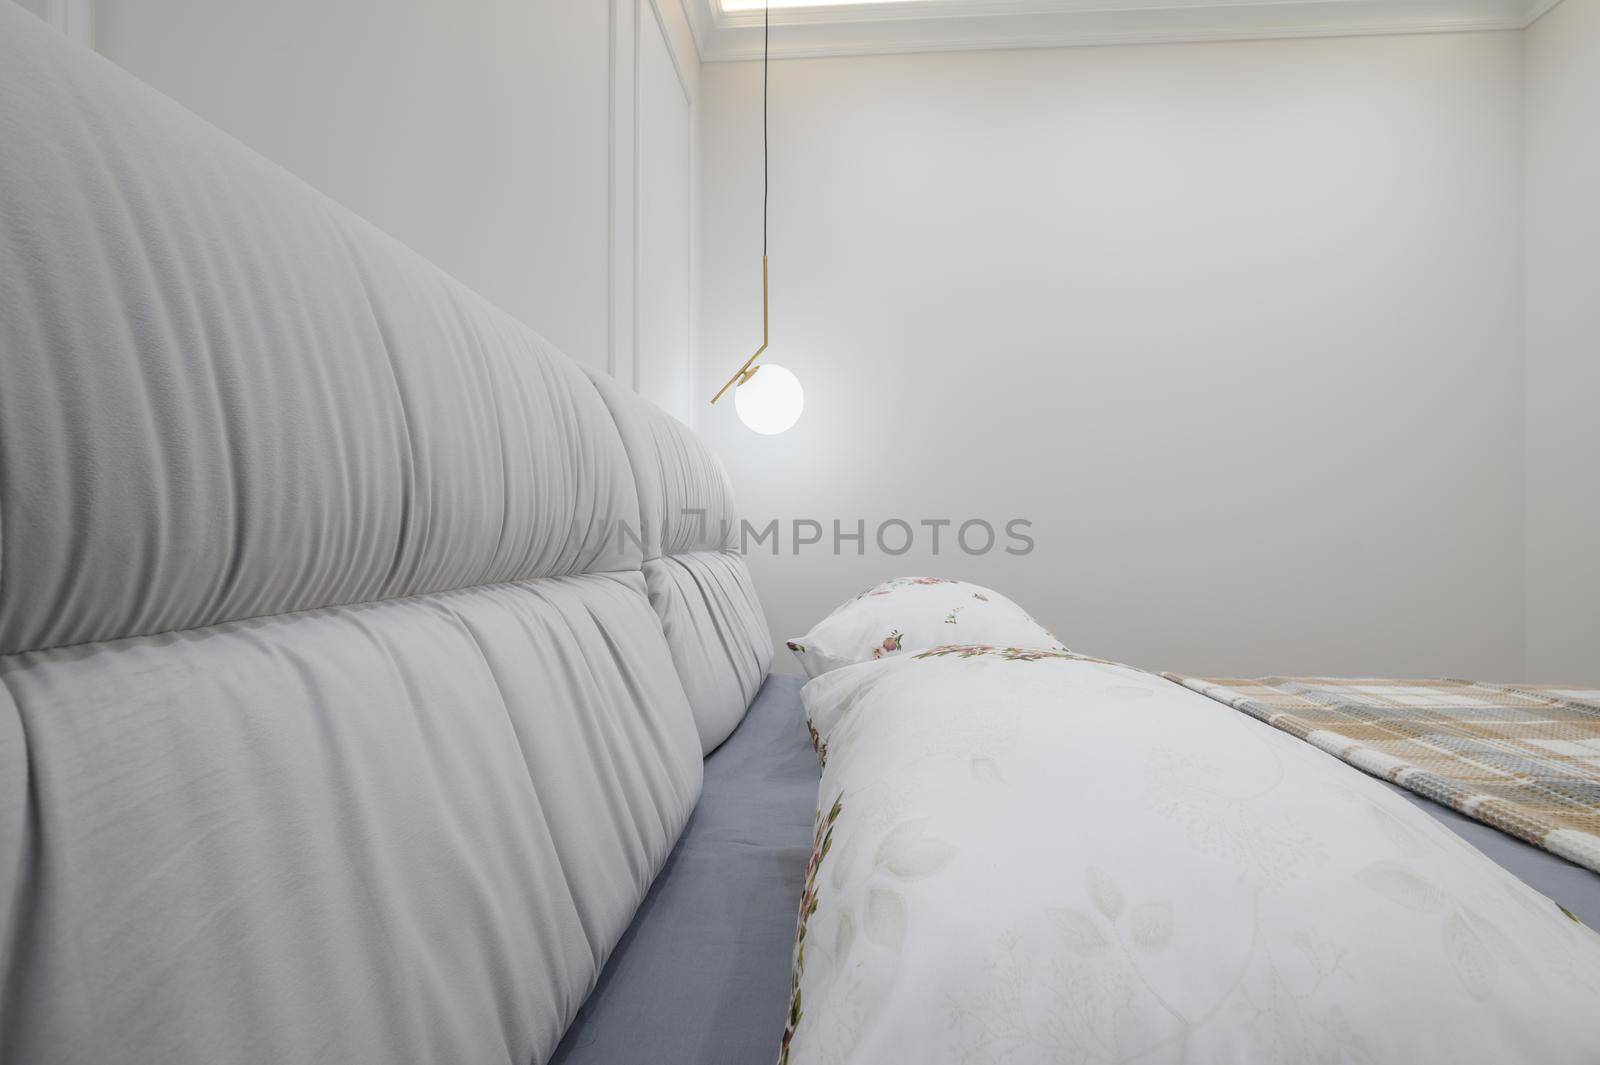 Closeup to double bed with a plaid blanket and pillows on it in a cozy bedroom with white walls and a light fixtures